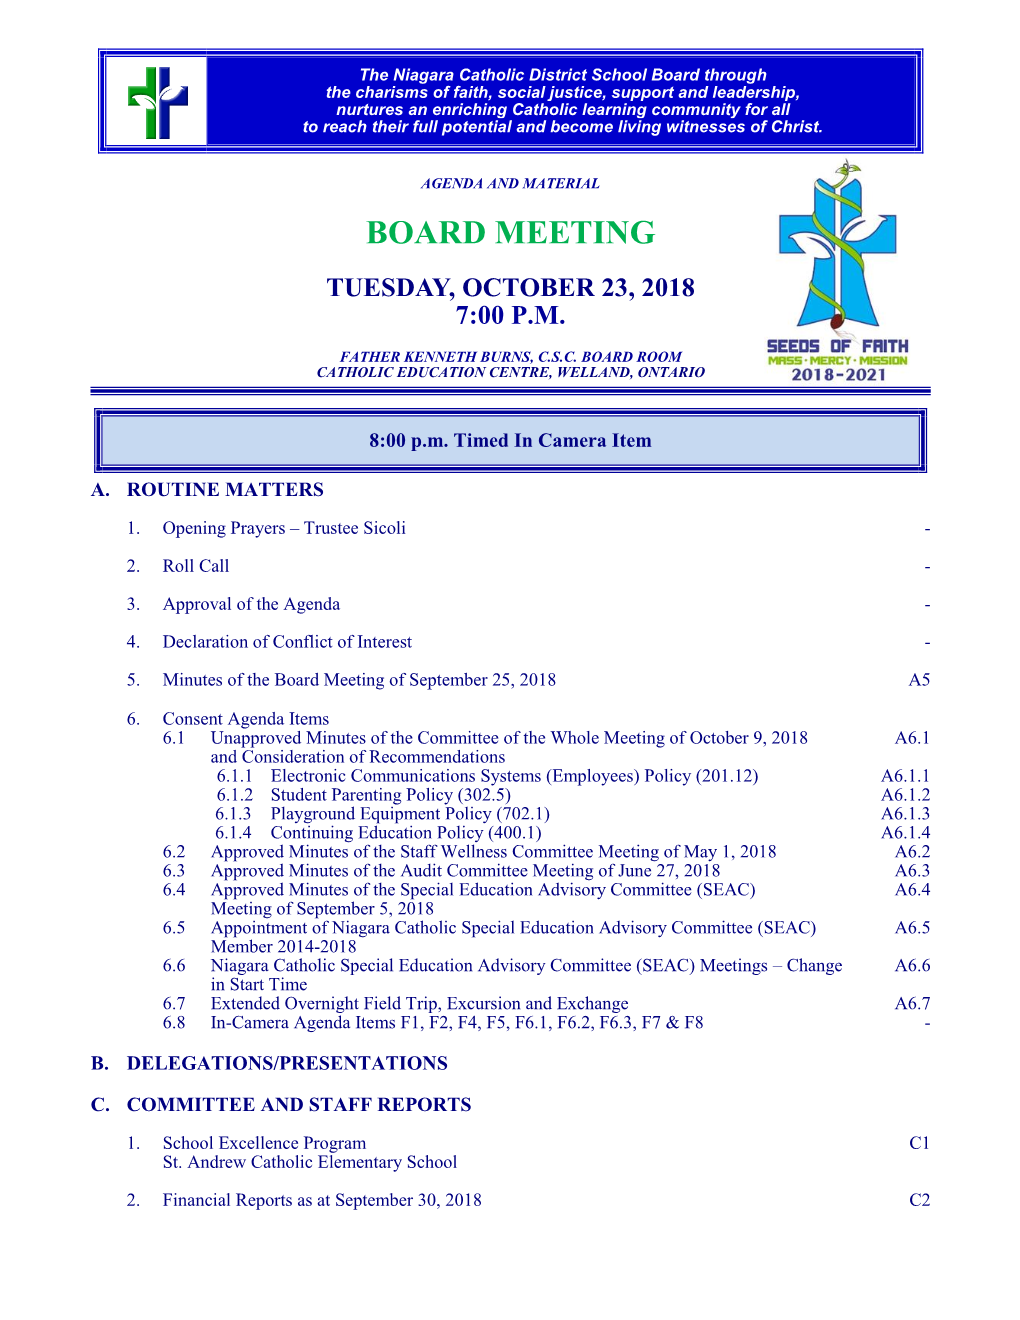 Board Meeting Tuesday, October 23, 2018 7:00 P.M